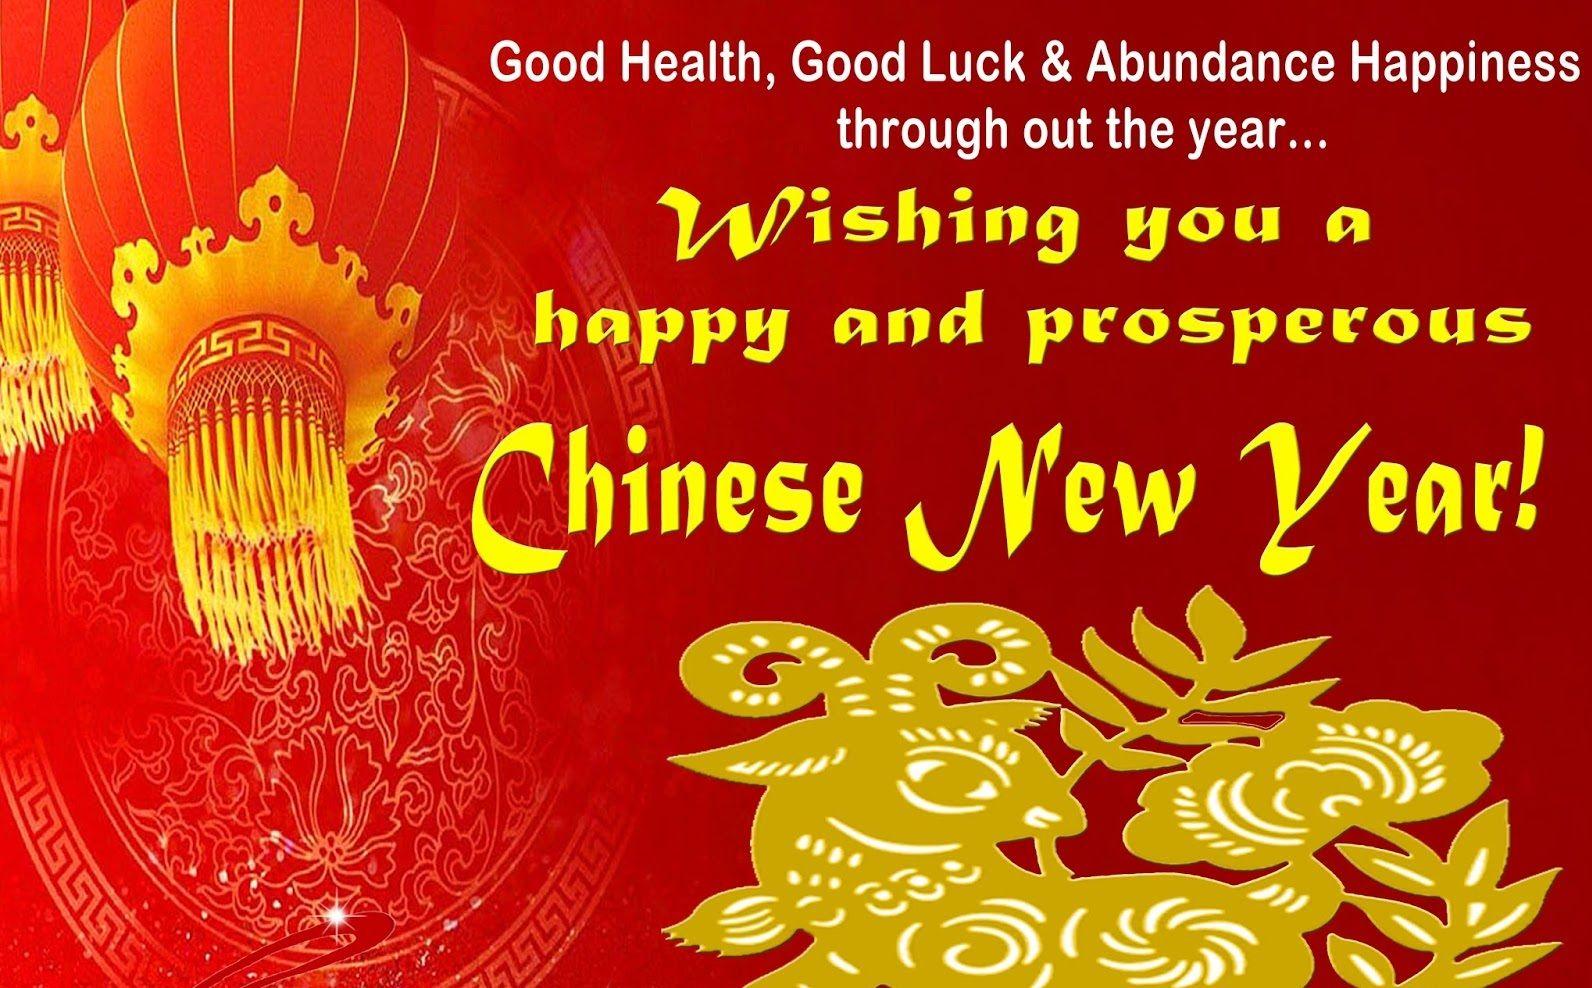 chinese new year quotes picture free download. pagety.com. happy